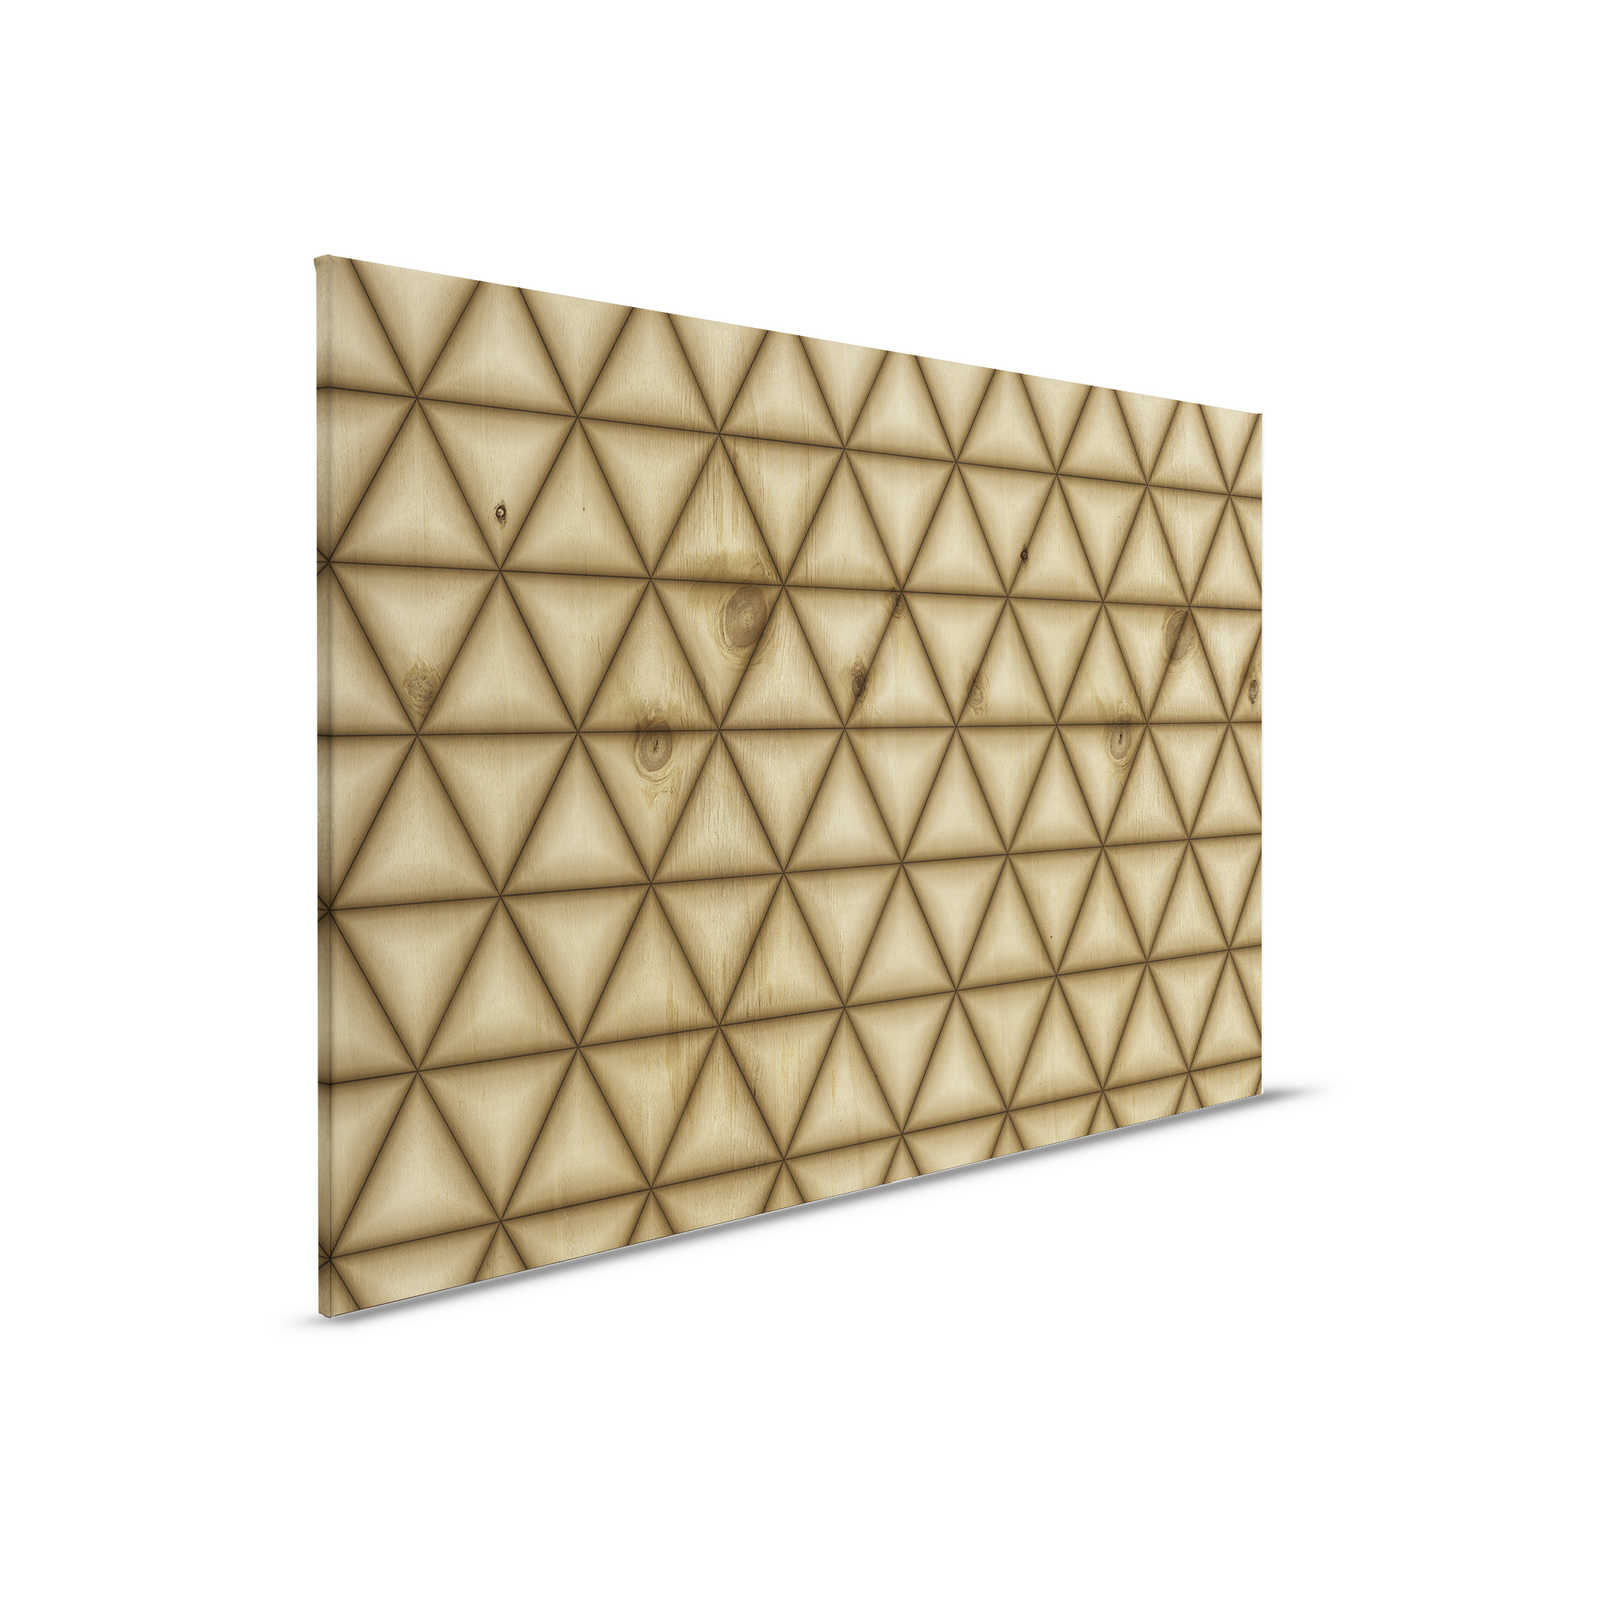         Canvas painting geometric triangle pattern in wood look | brown, beige - 0,90 m x 0,60 m
    